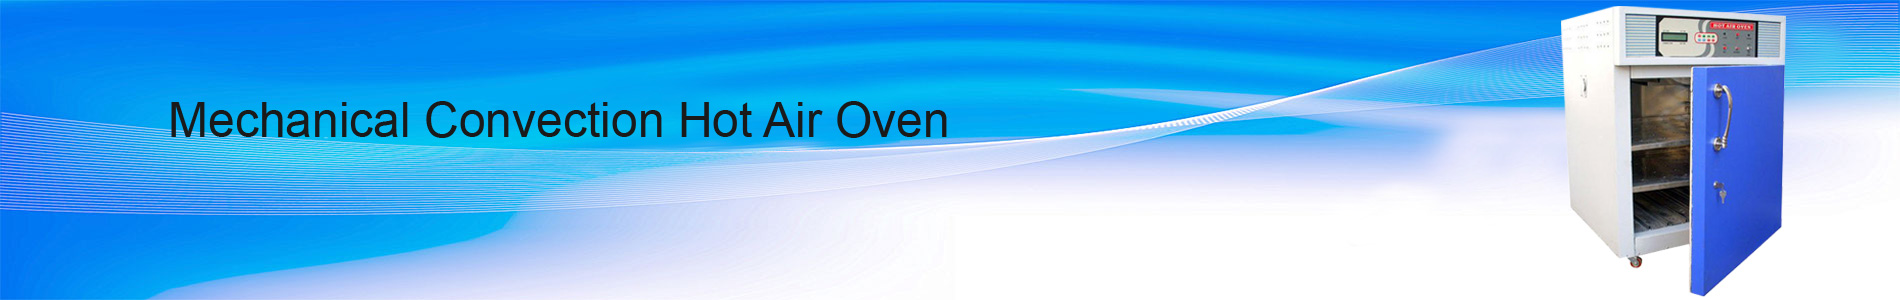 Mechanical Convection Hot Air Oven Manufacturers